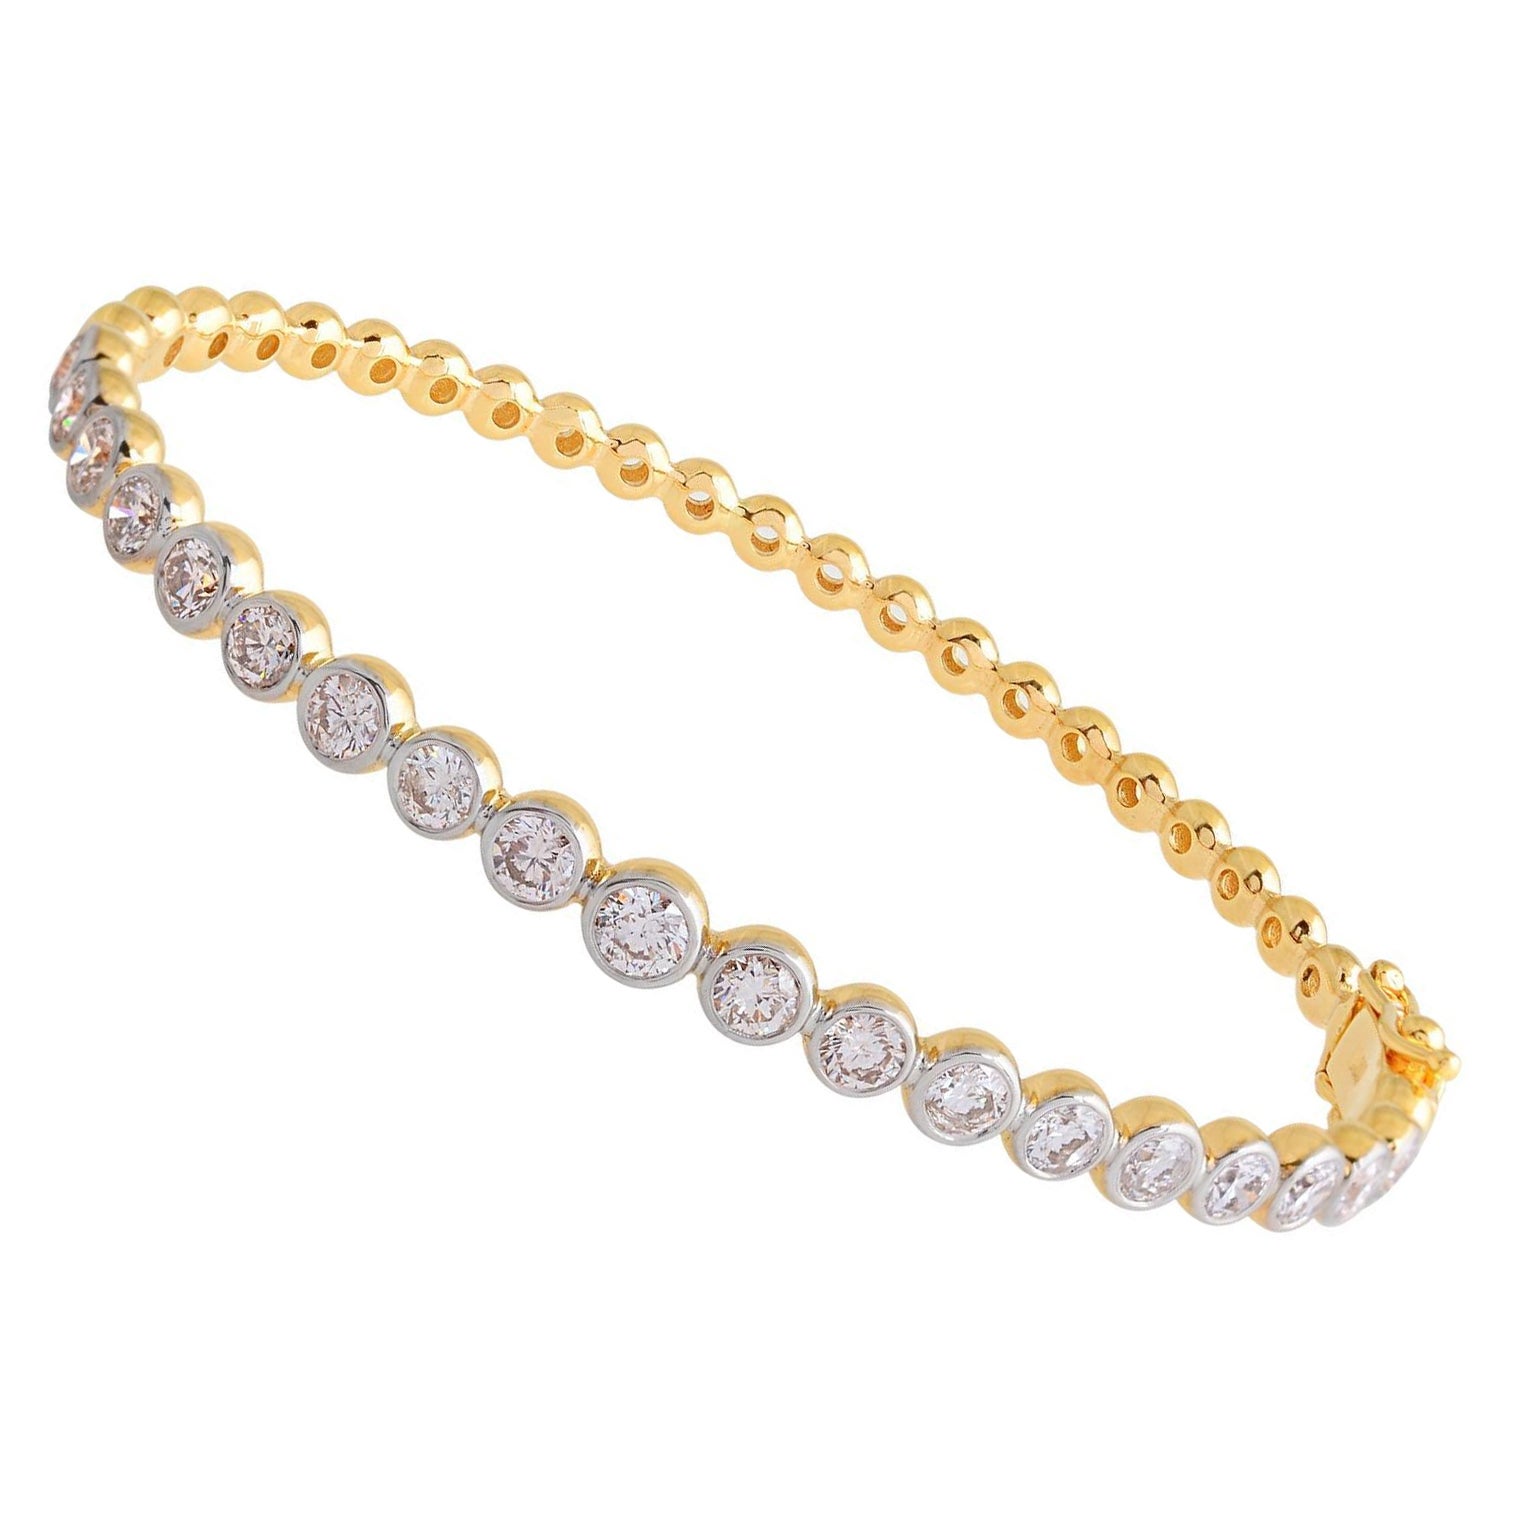 2.50 Carat Single Line Natural Diamond Bracelet Solid 14k Yellow Gold Jewelry For Sale